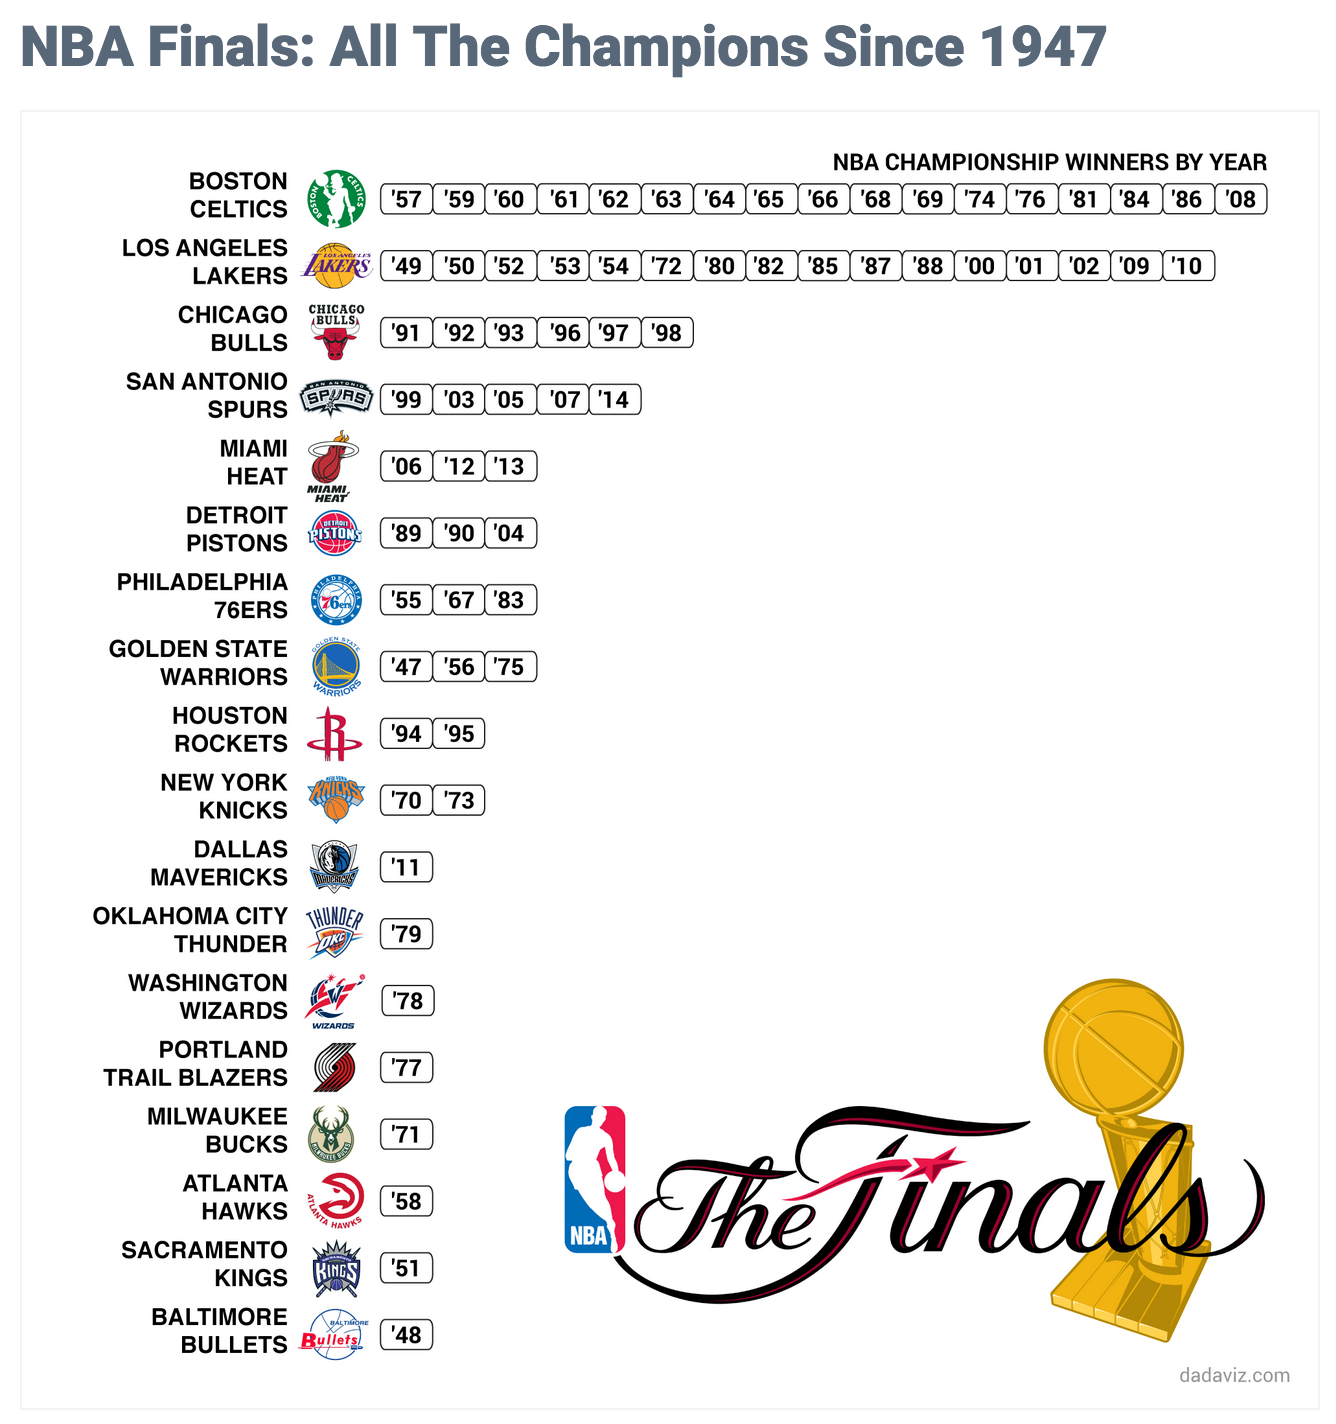 NBA Finals All The Champions Since 1947 Retirement Investments